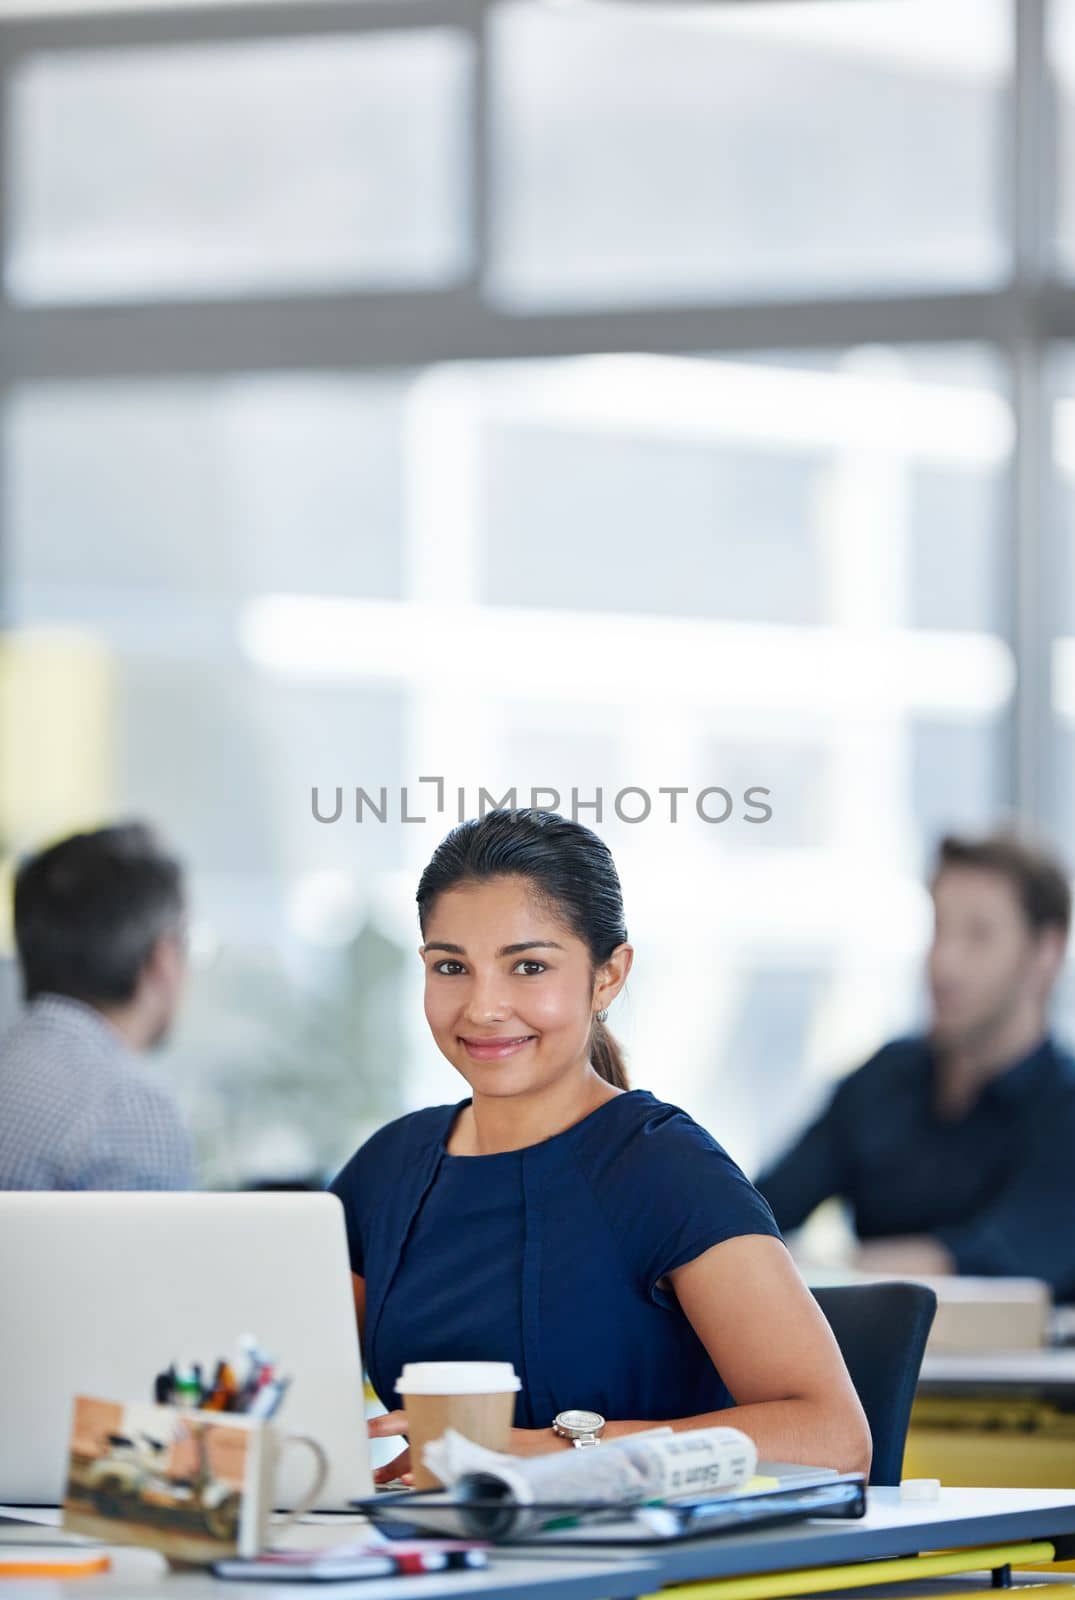 My career path is going exactly as I planned. Portrait of a designer sitting at her desk working on a laptop with colleagues in the background